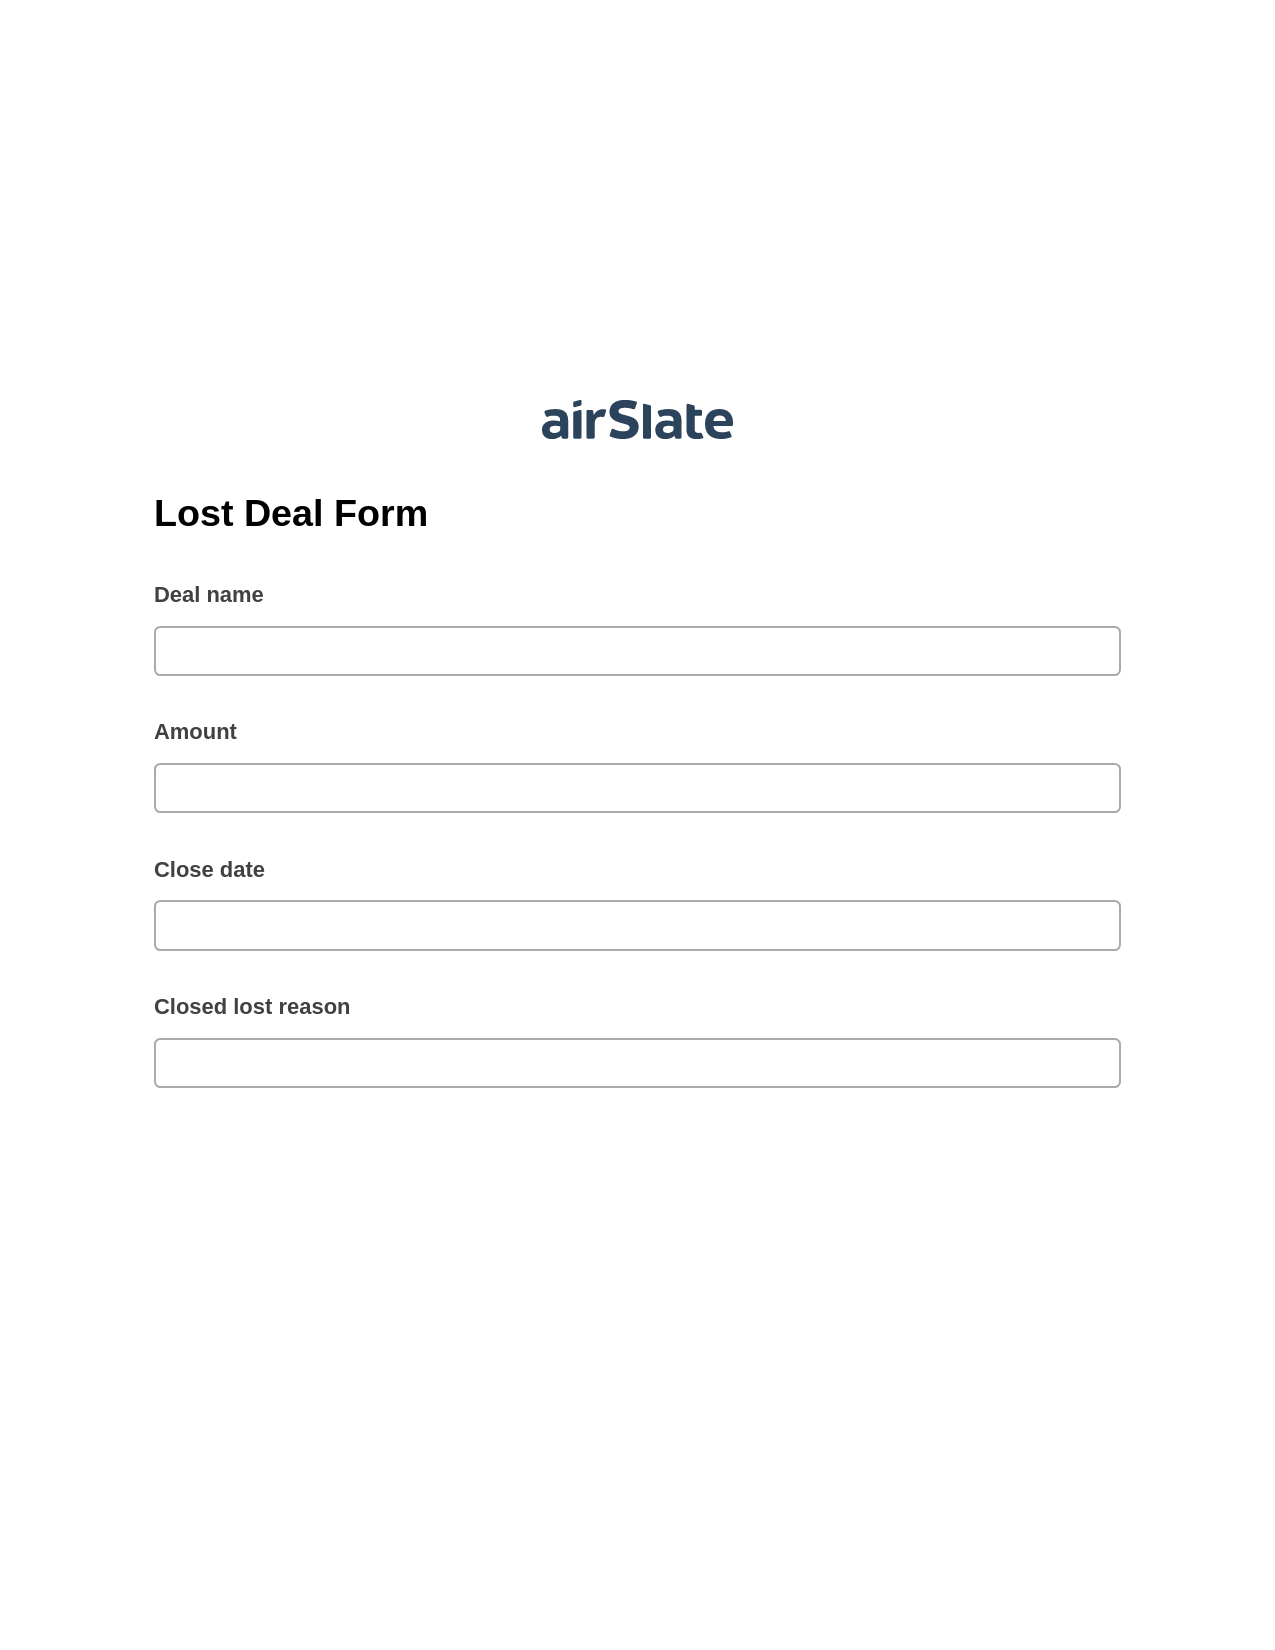 Lost Deal Form Pre-fill from Salesforce Records Bot, Reminder Bot, Archive to SharePoint Folder Bot